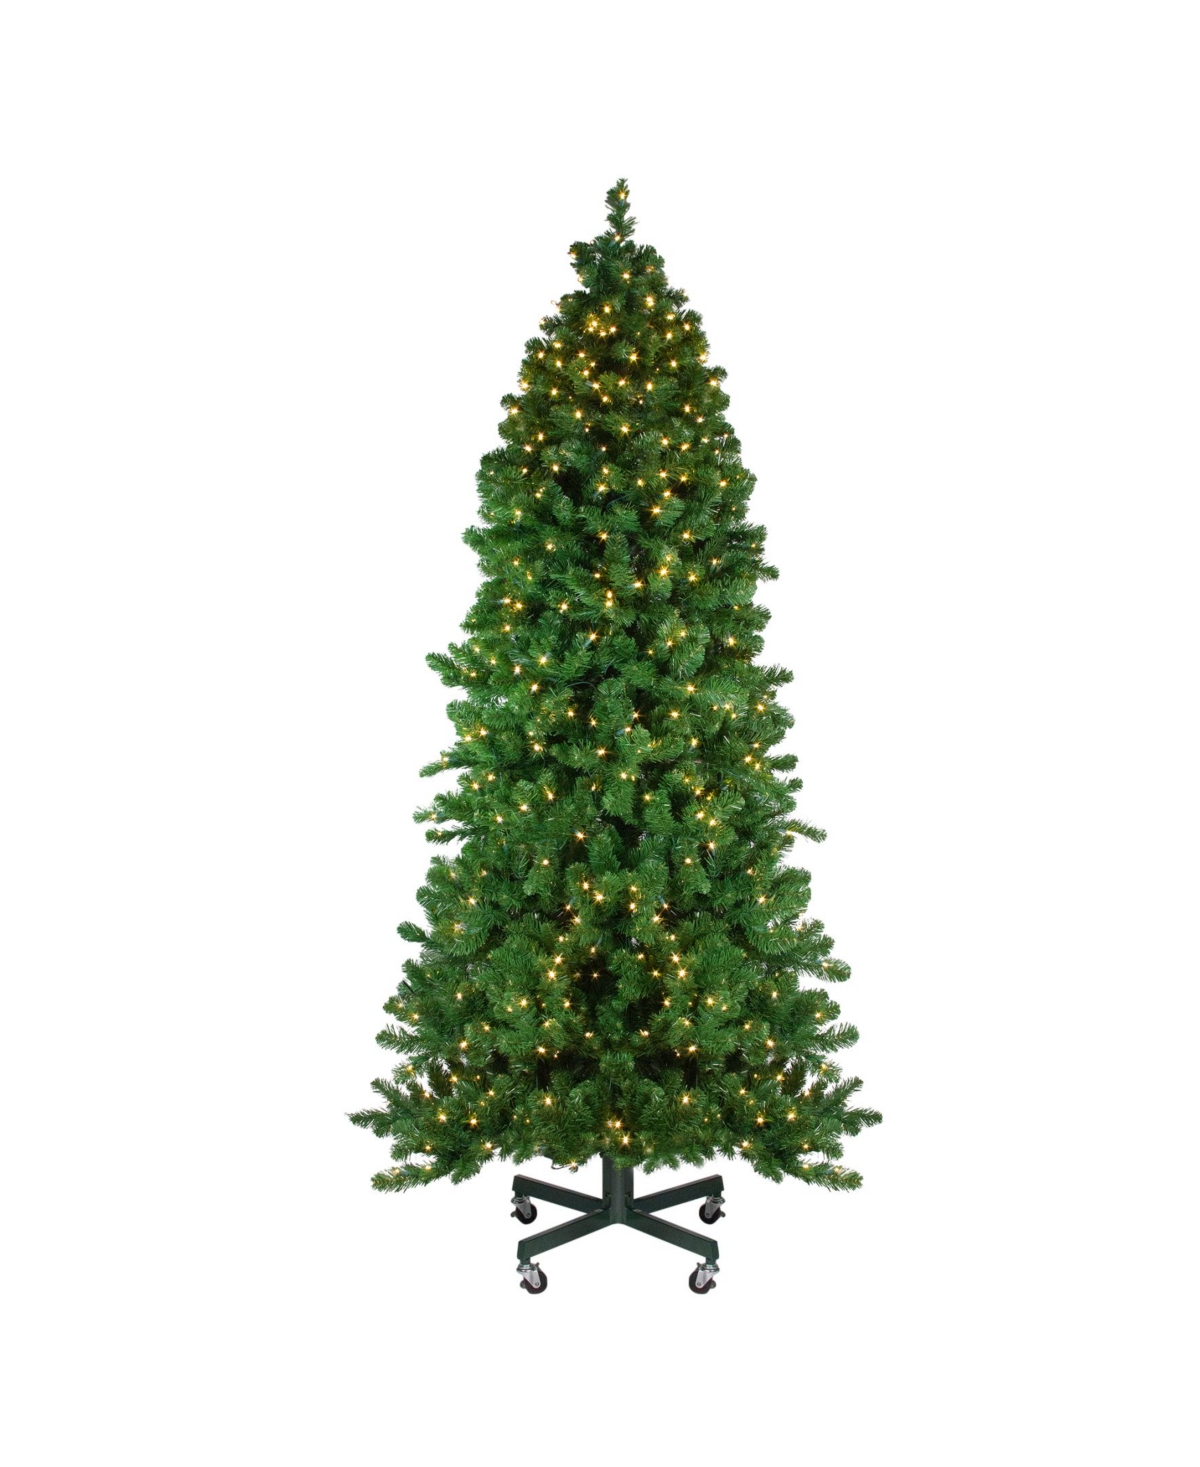 7.5' Pre-Lit Olympia Pine Artificial Christmas Tree - Warm White Led Lights - Green